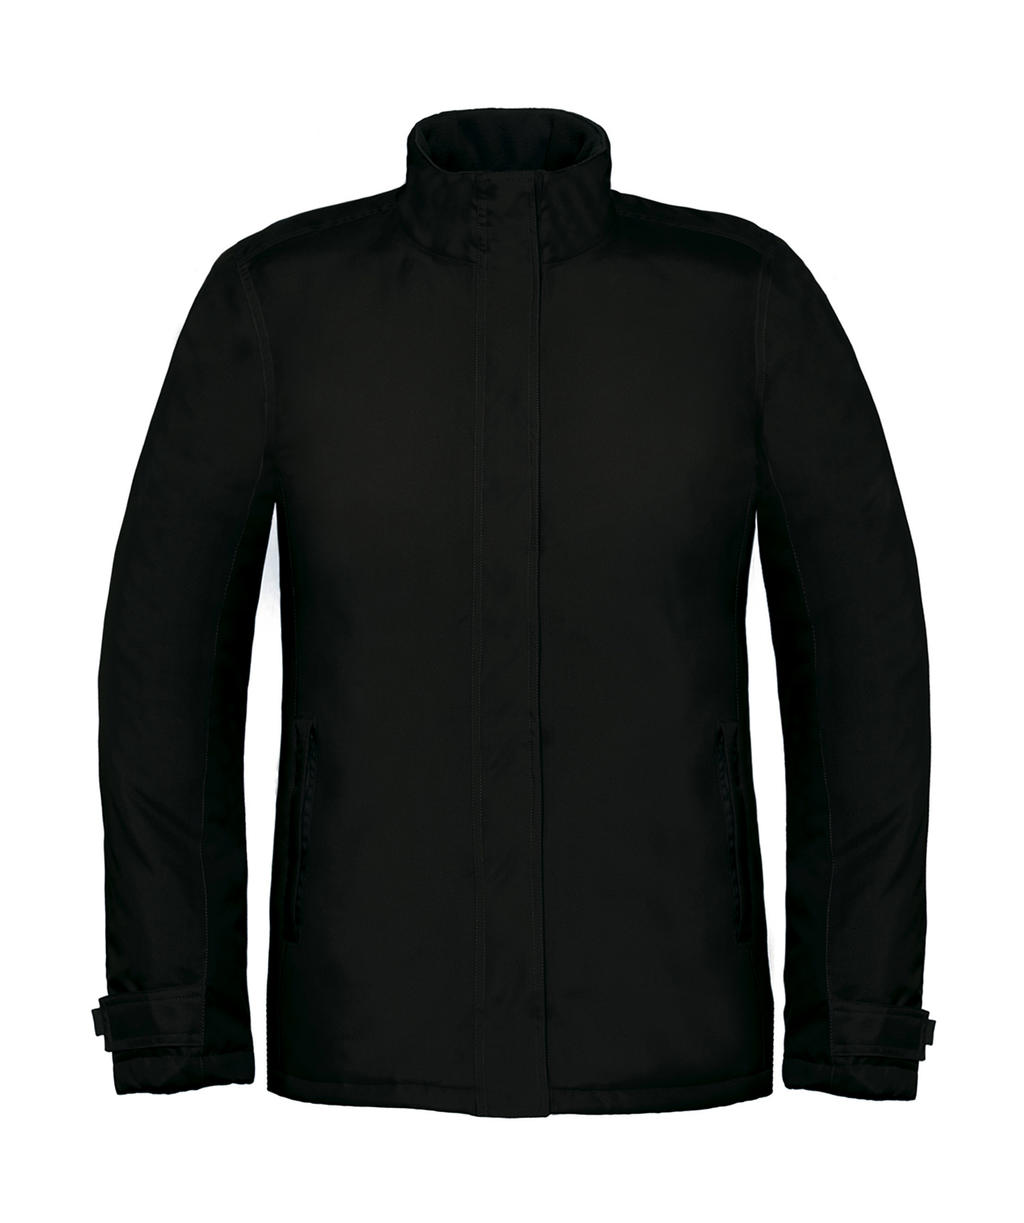  Real+/women Heavy Weight Jacket in Farbe Black